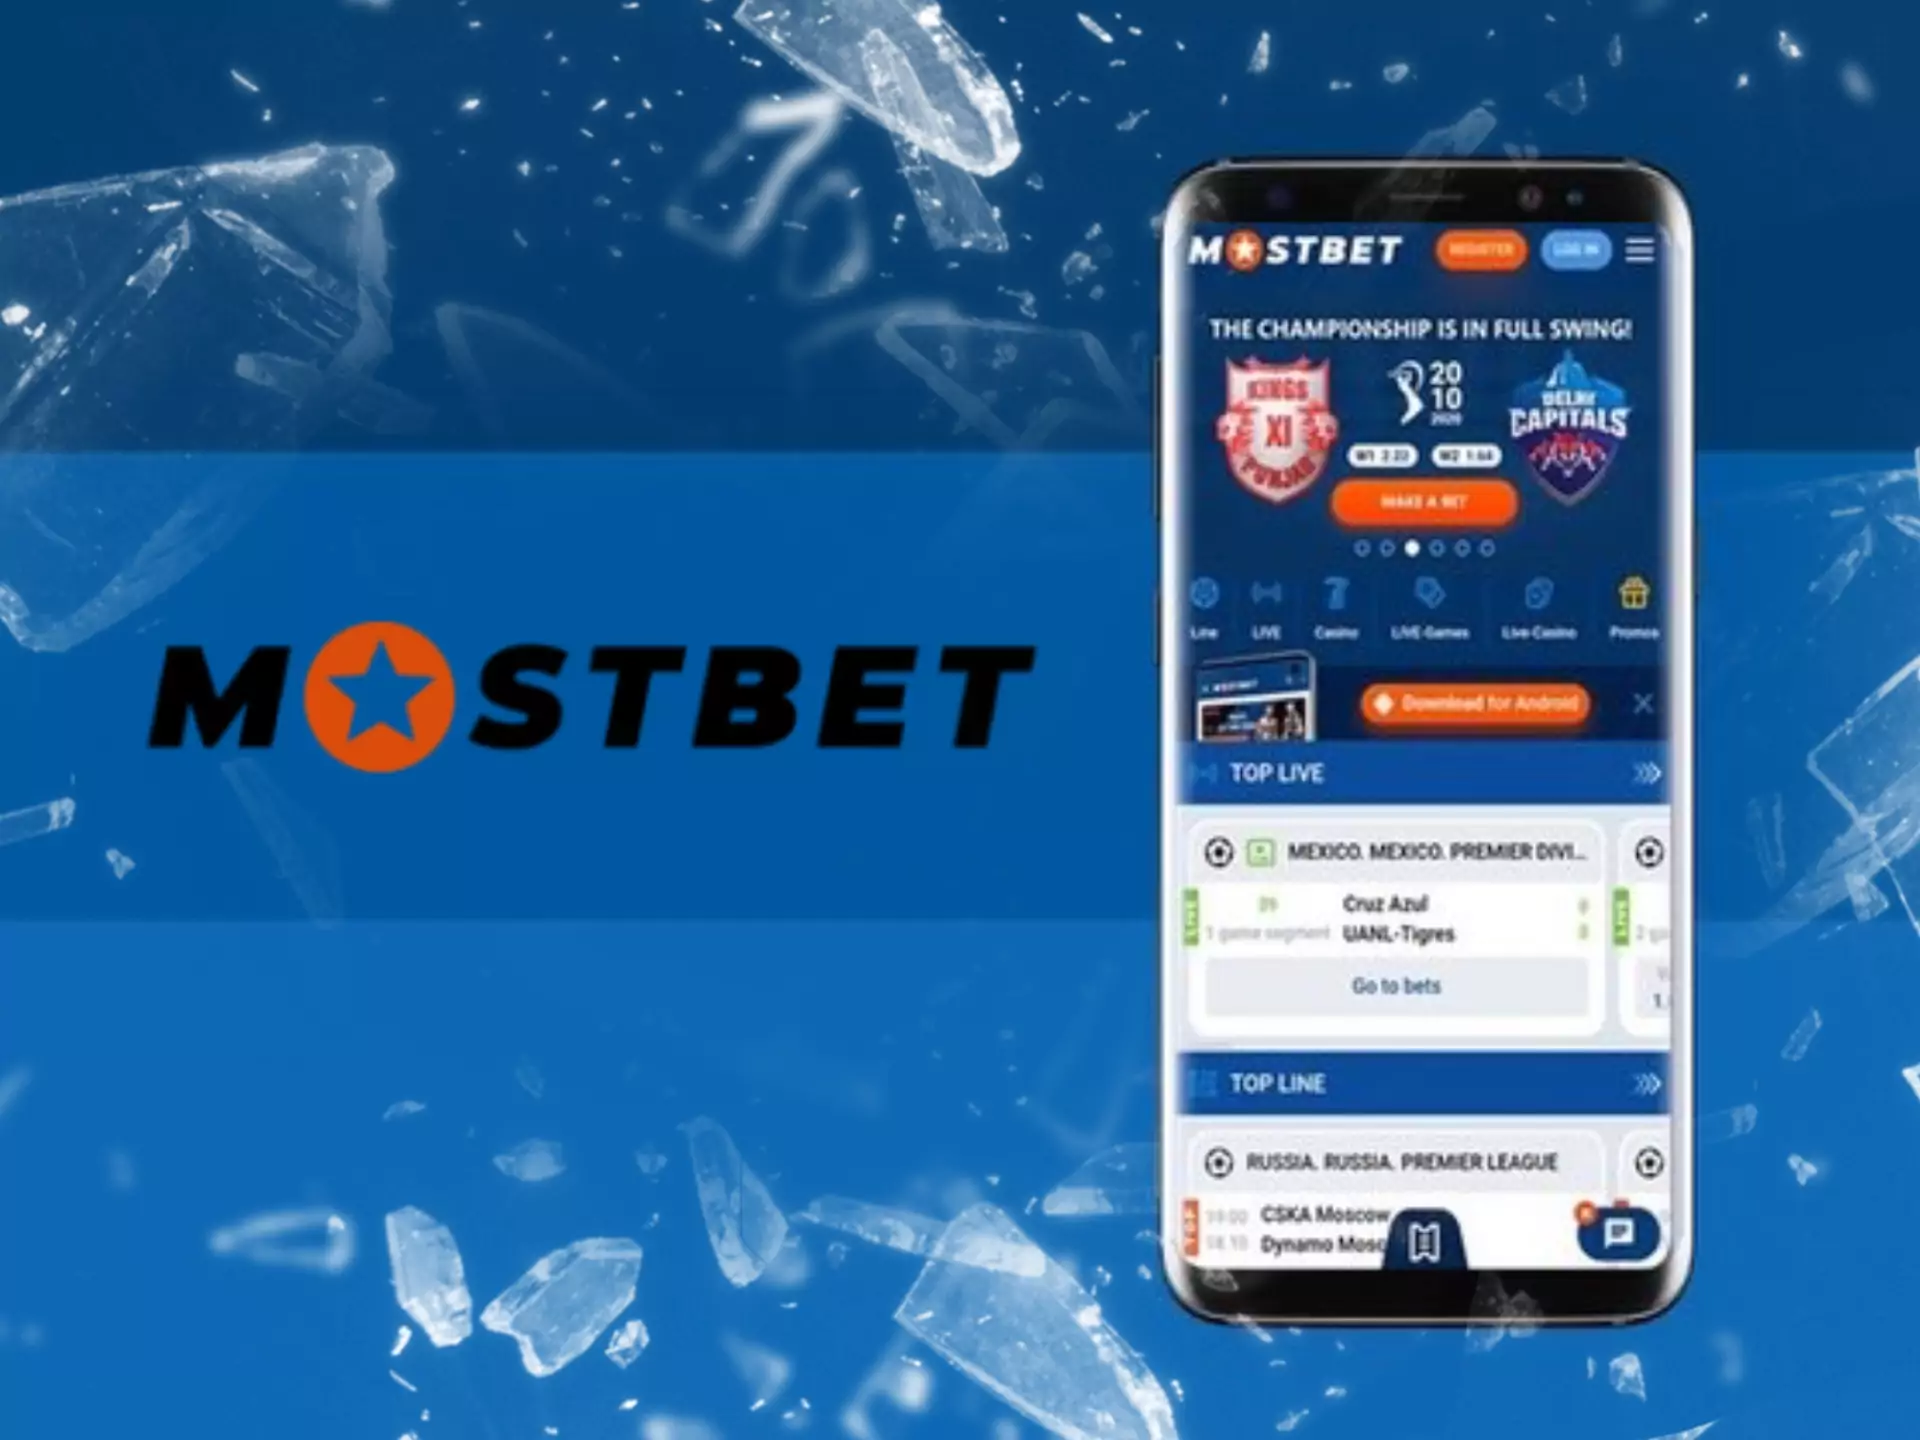 Install the Motbet app on your Android or iOS device for more convenient betting.